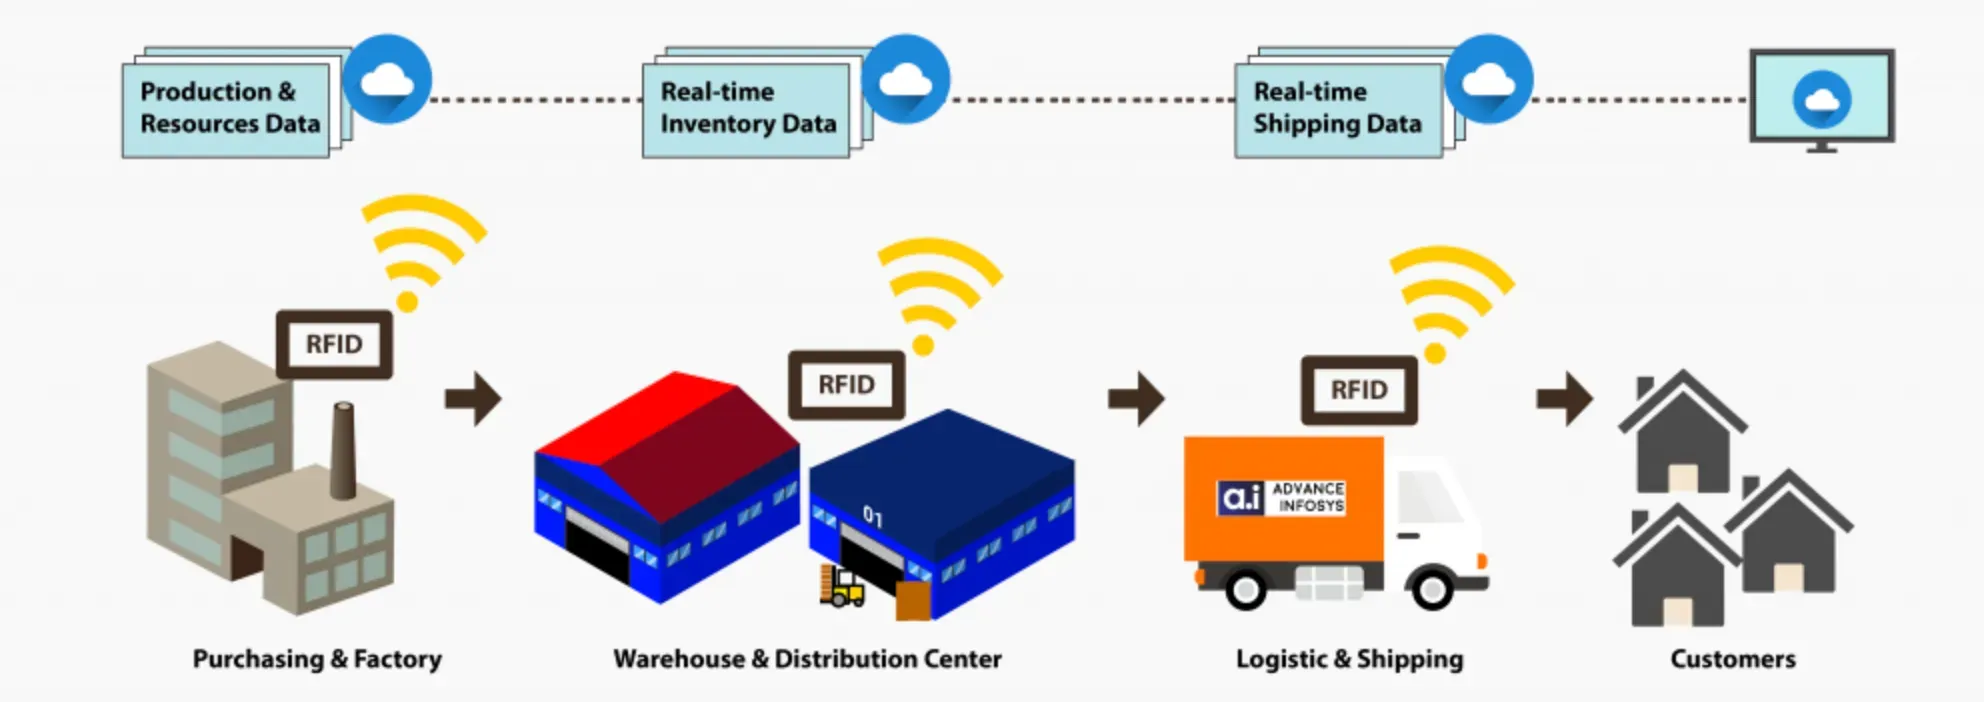 Barcode and RFID Technology (Supply chain automation)